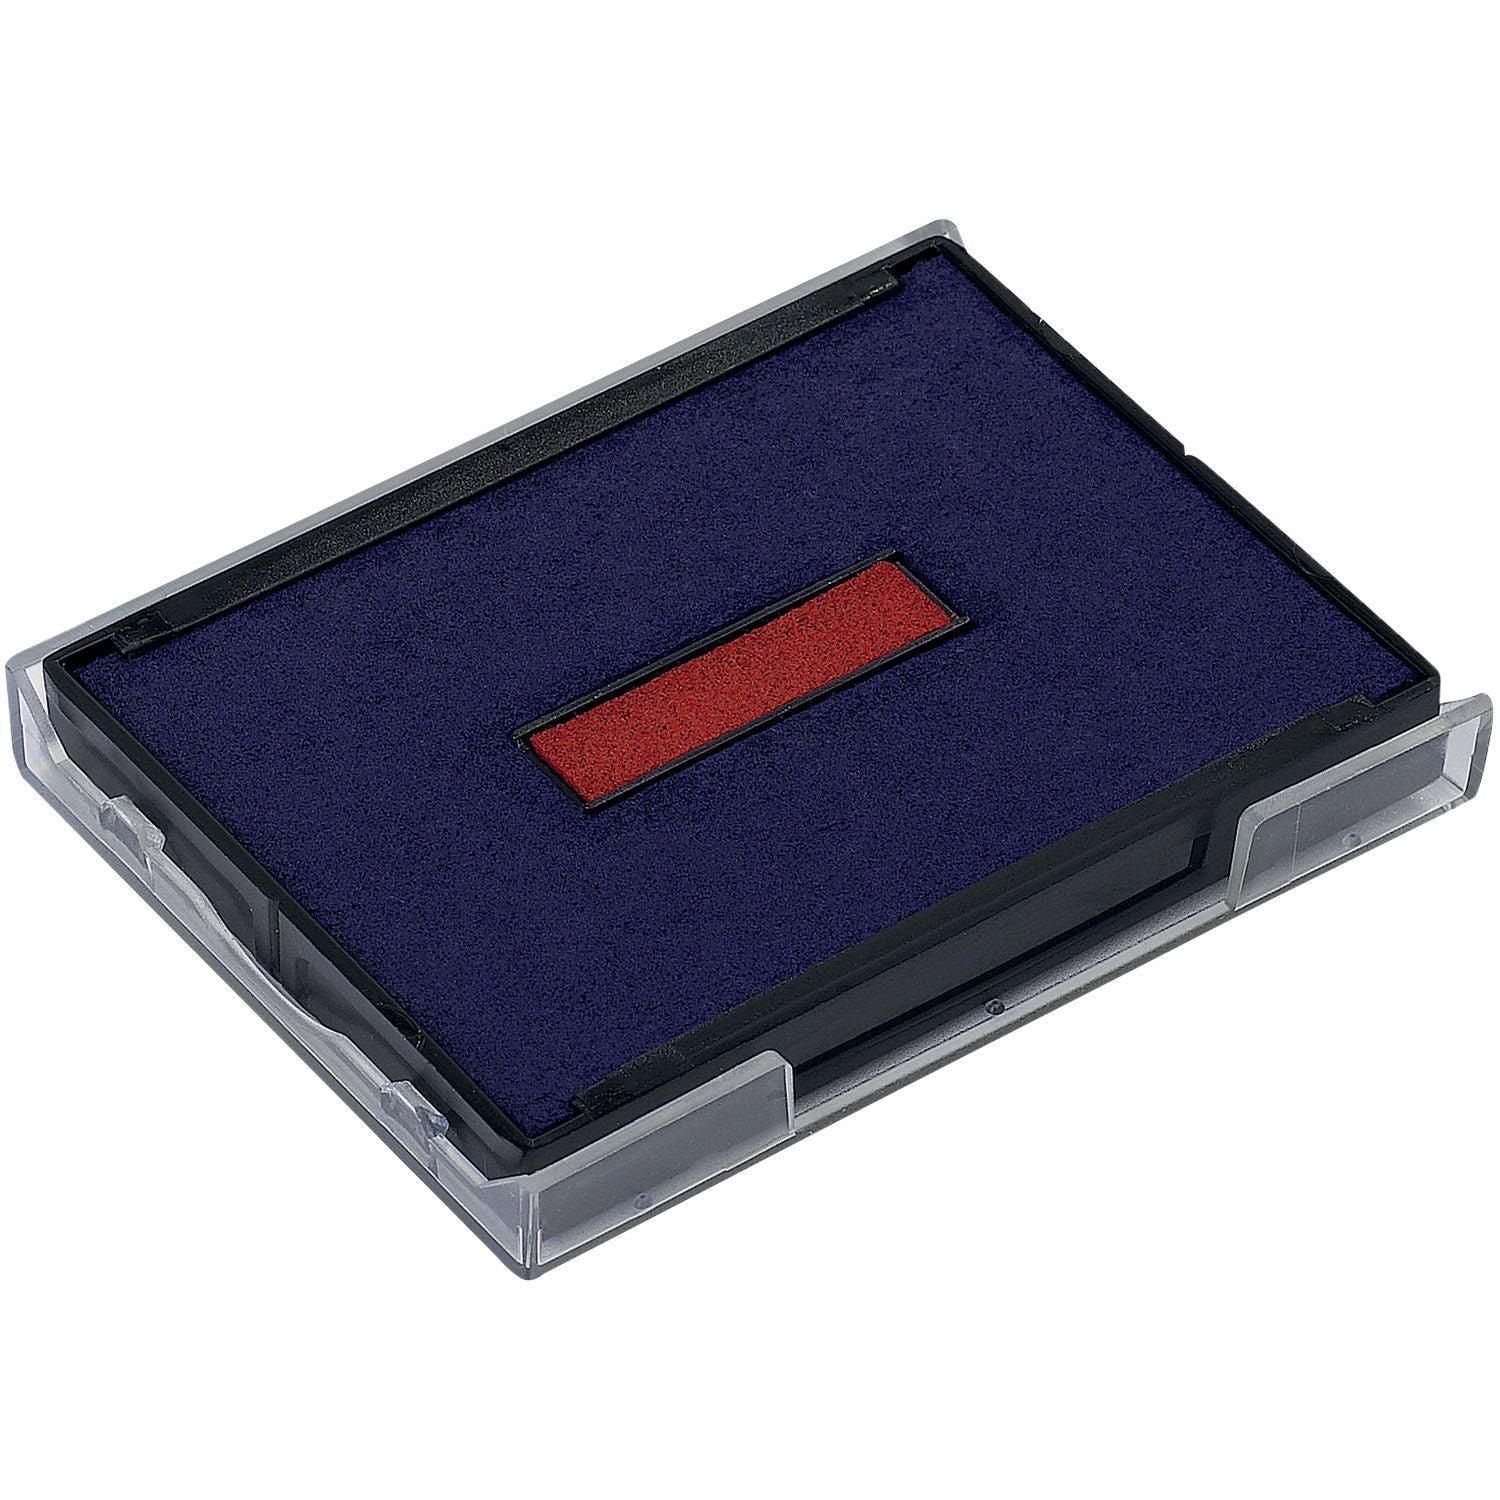 Two Color Replacement Ink Pad For 4727 Trodat Blue Red